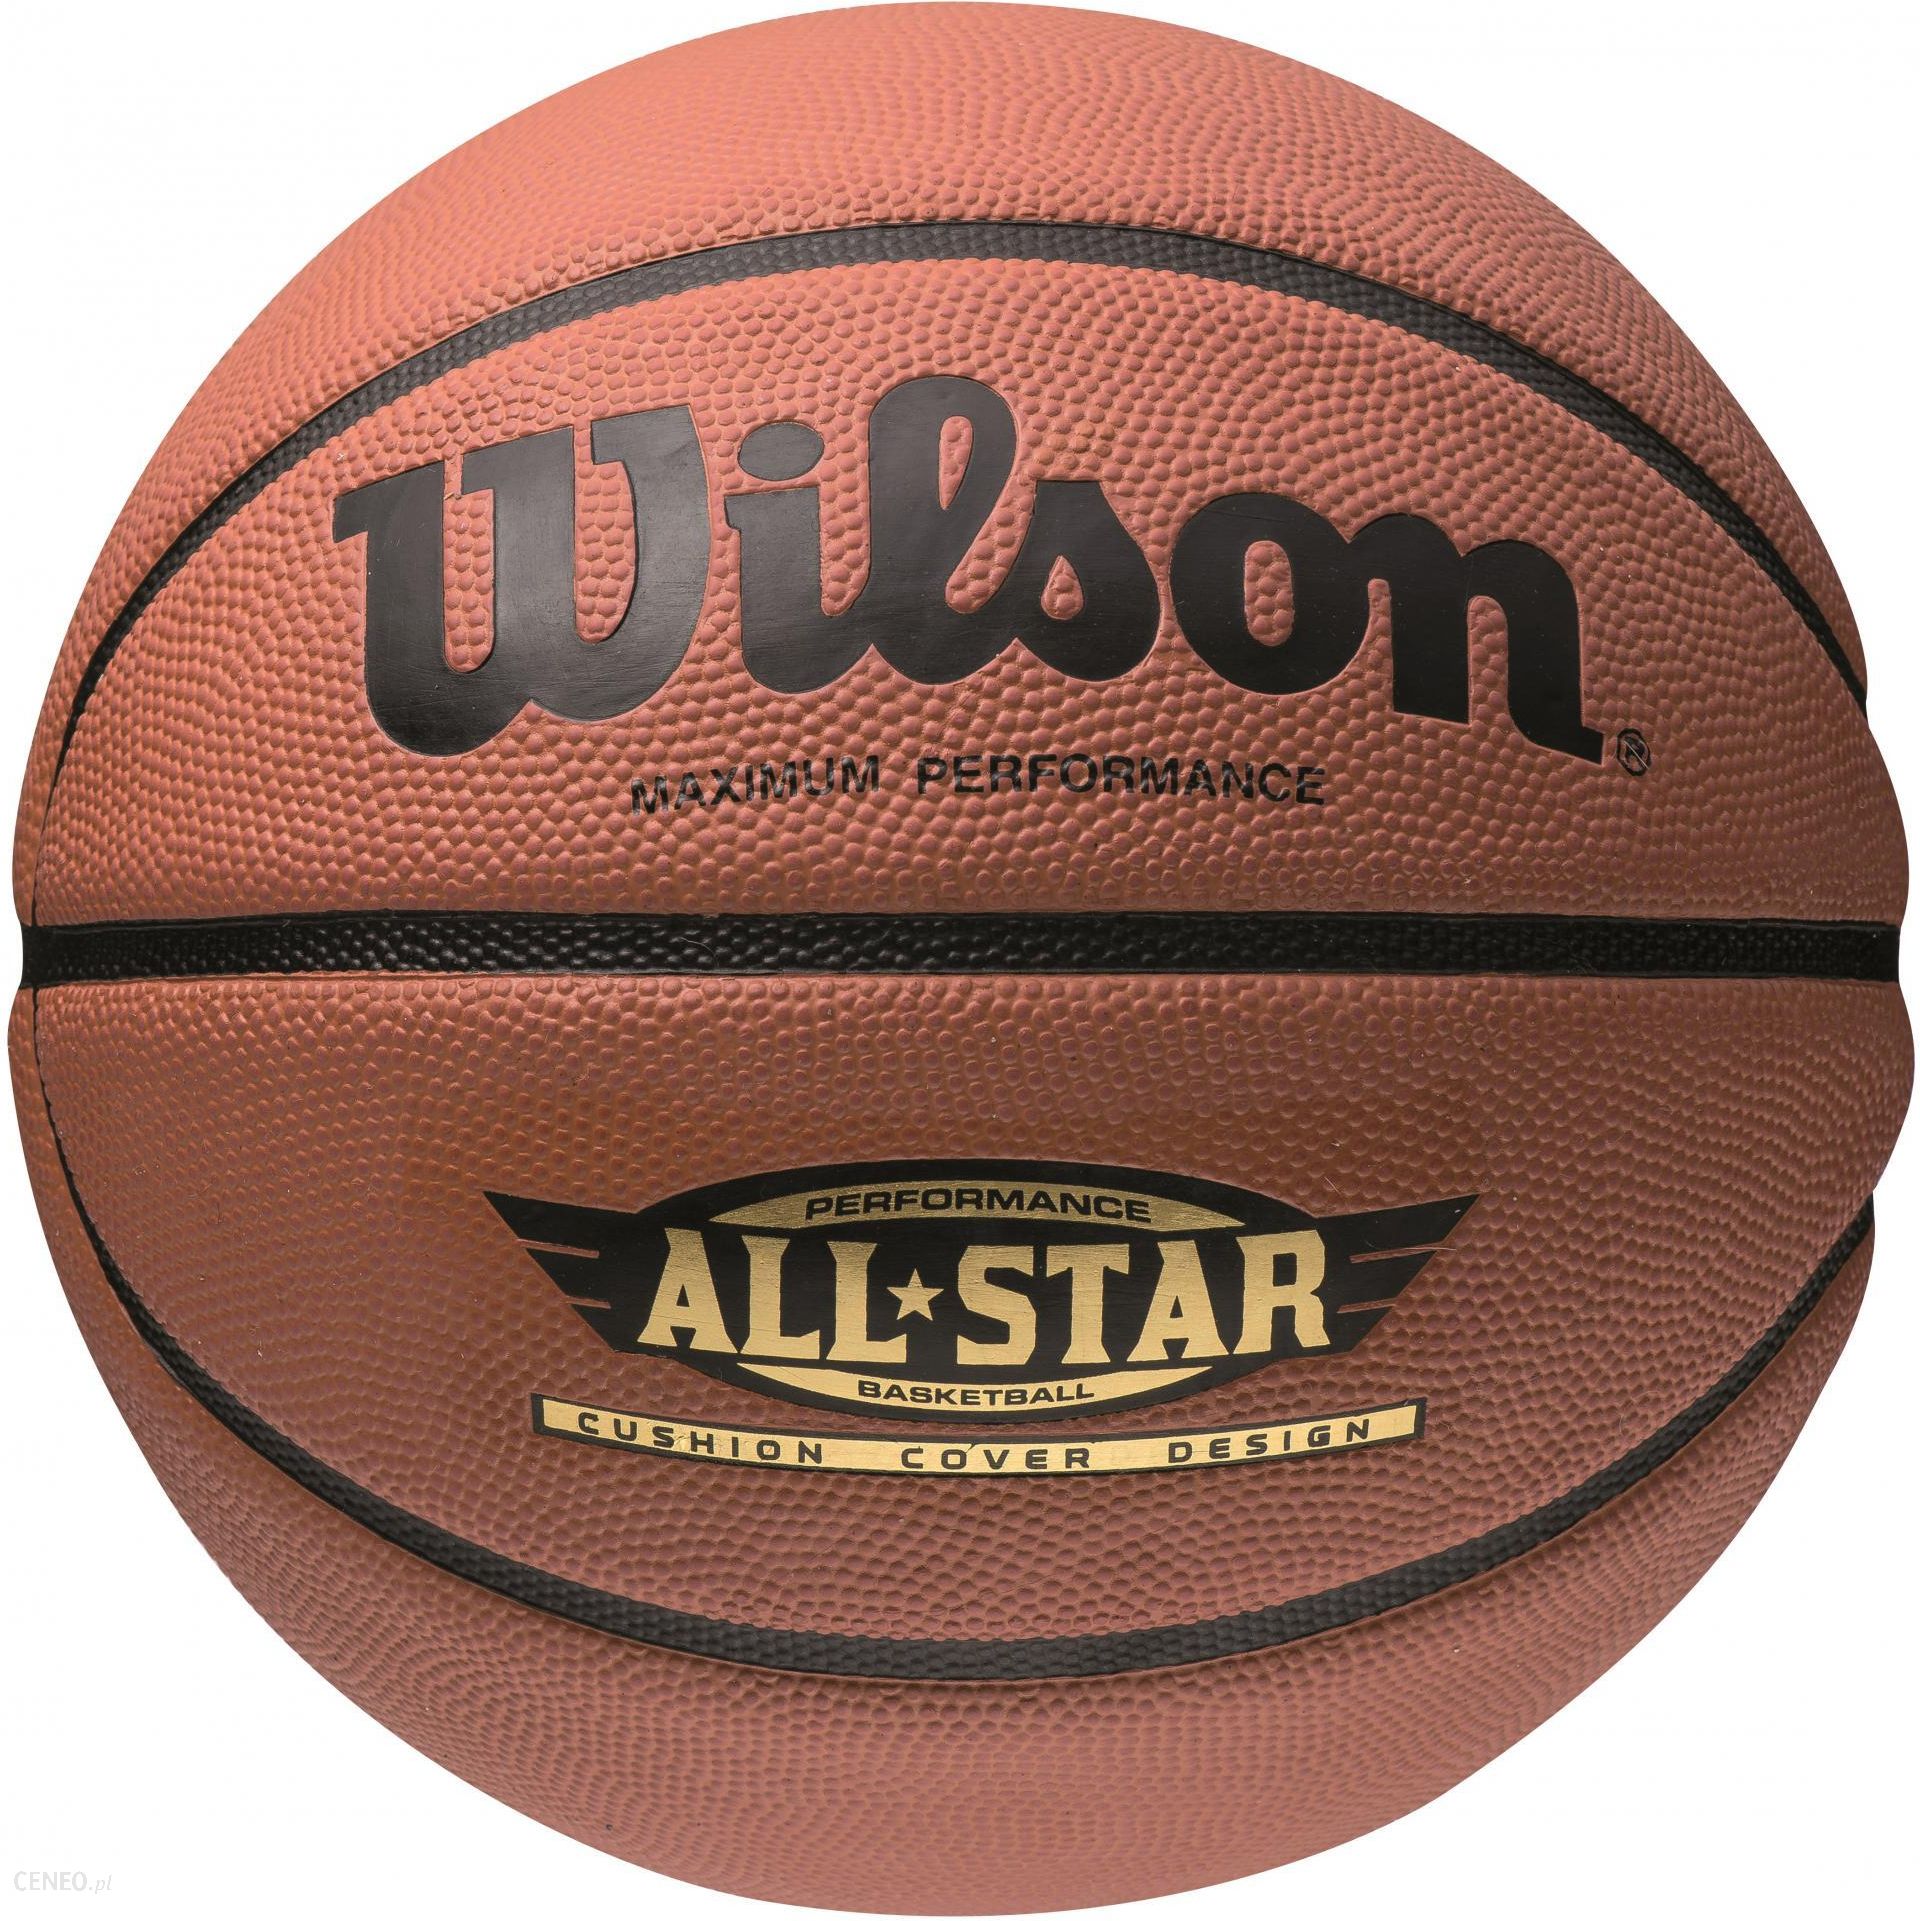 Wilson Outdoor Playing Match Training Soft Feel Performance All-Star Basketball 